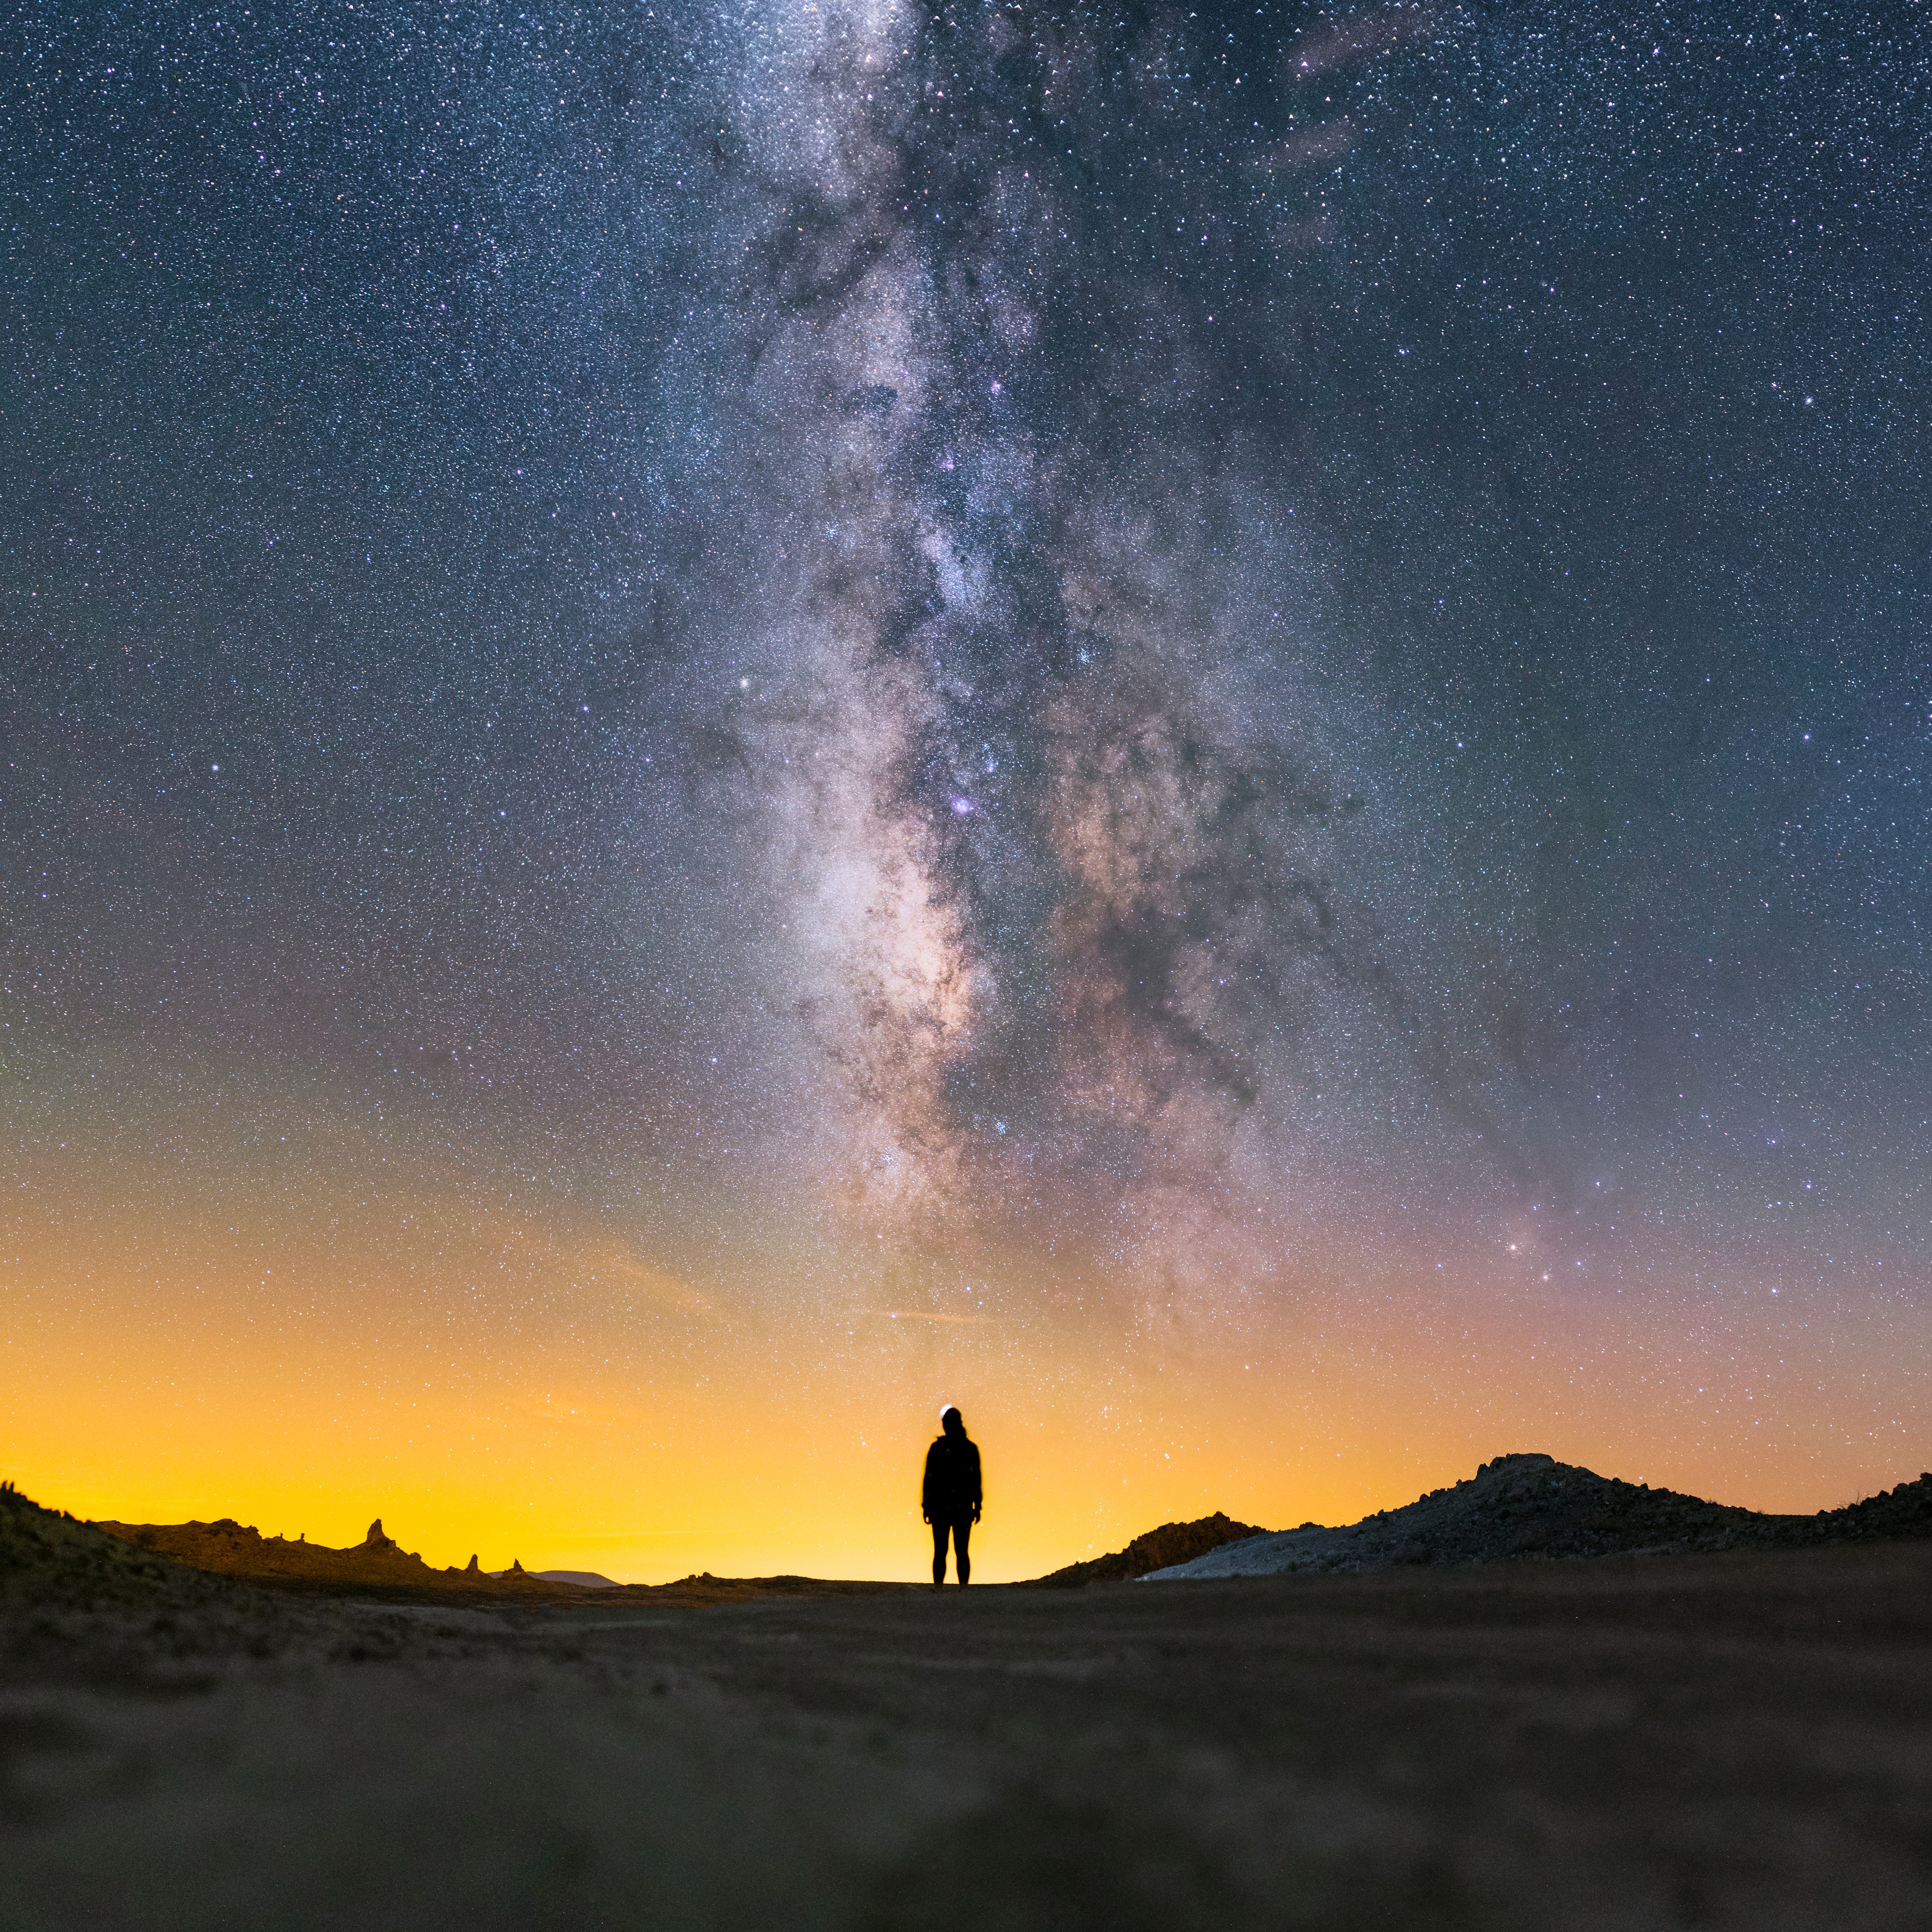 Milky Way lying above a lady's silhouette - Heavens Above Her